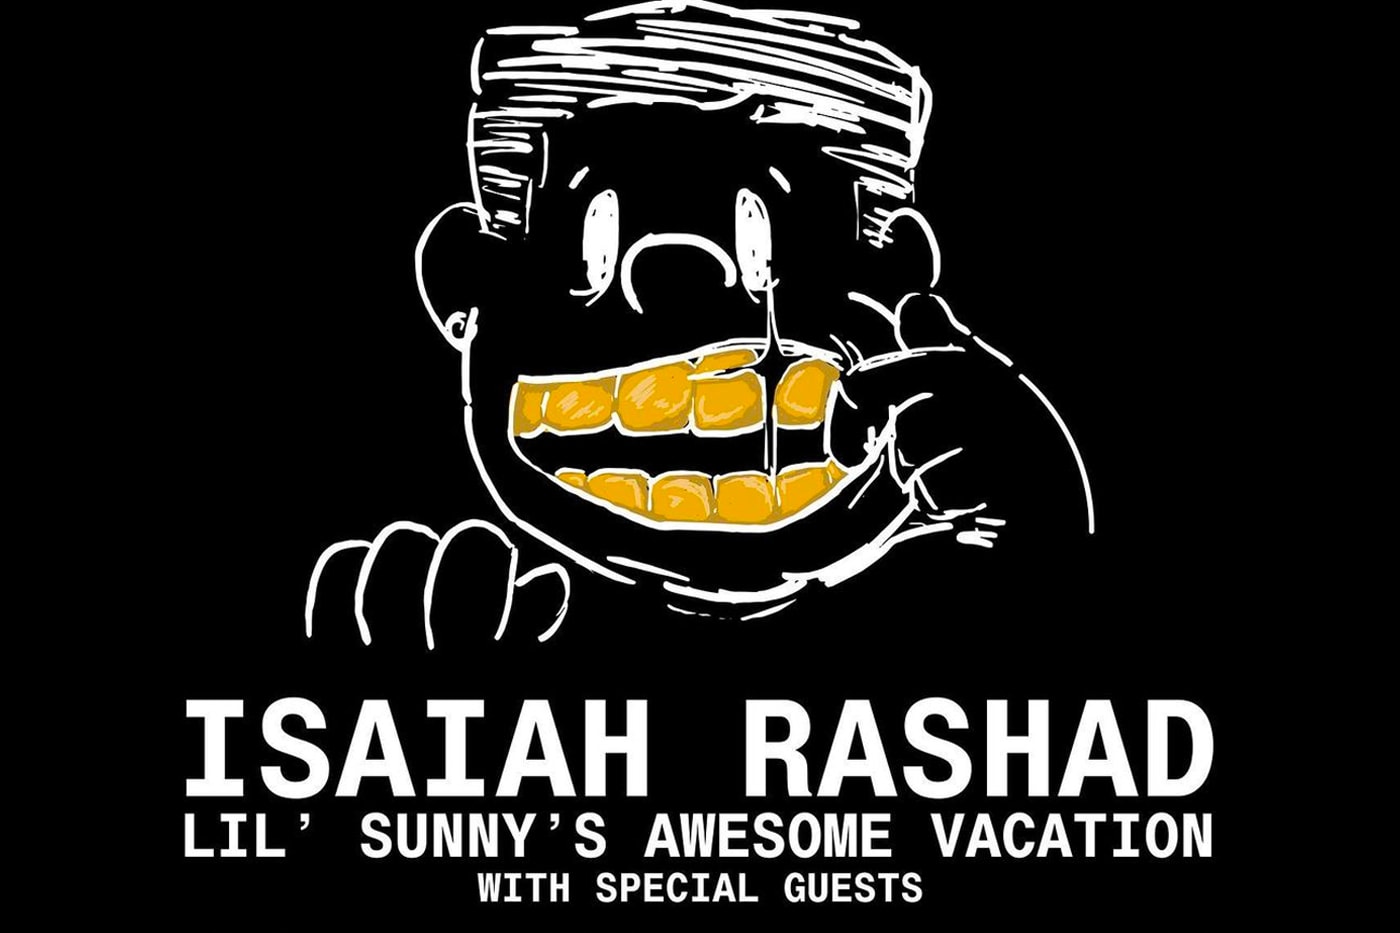 Isaiah Rashad lil sunny's awesome vacation 2021 Tour Dates the house is burning tde